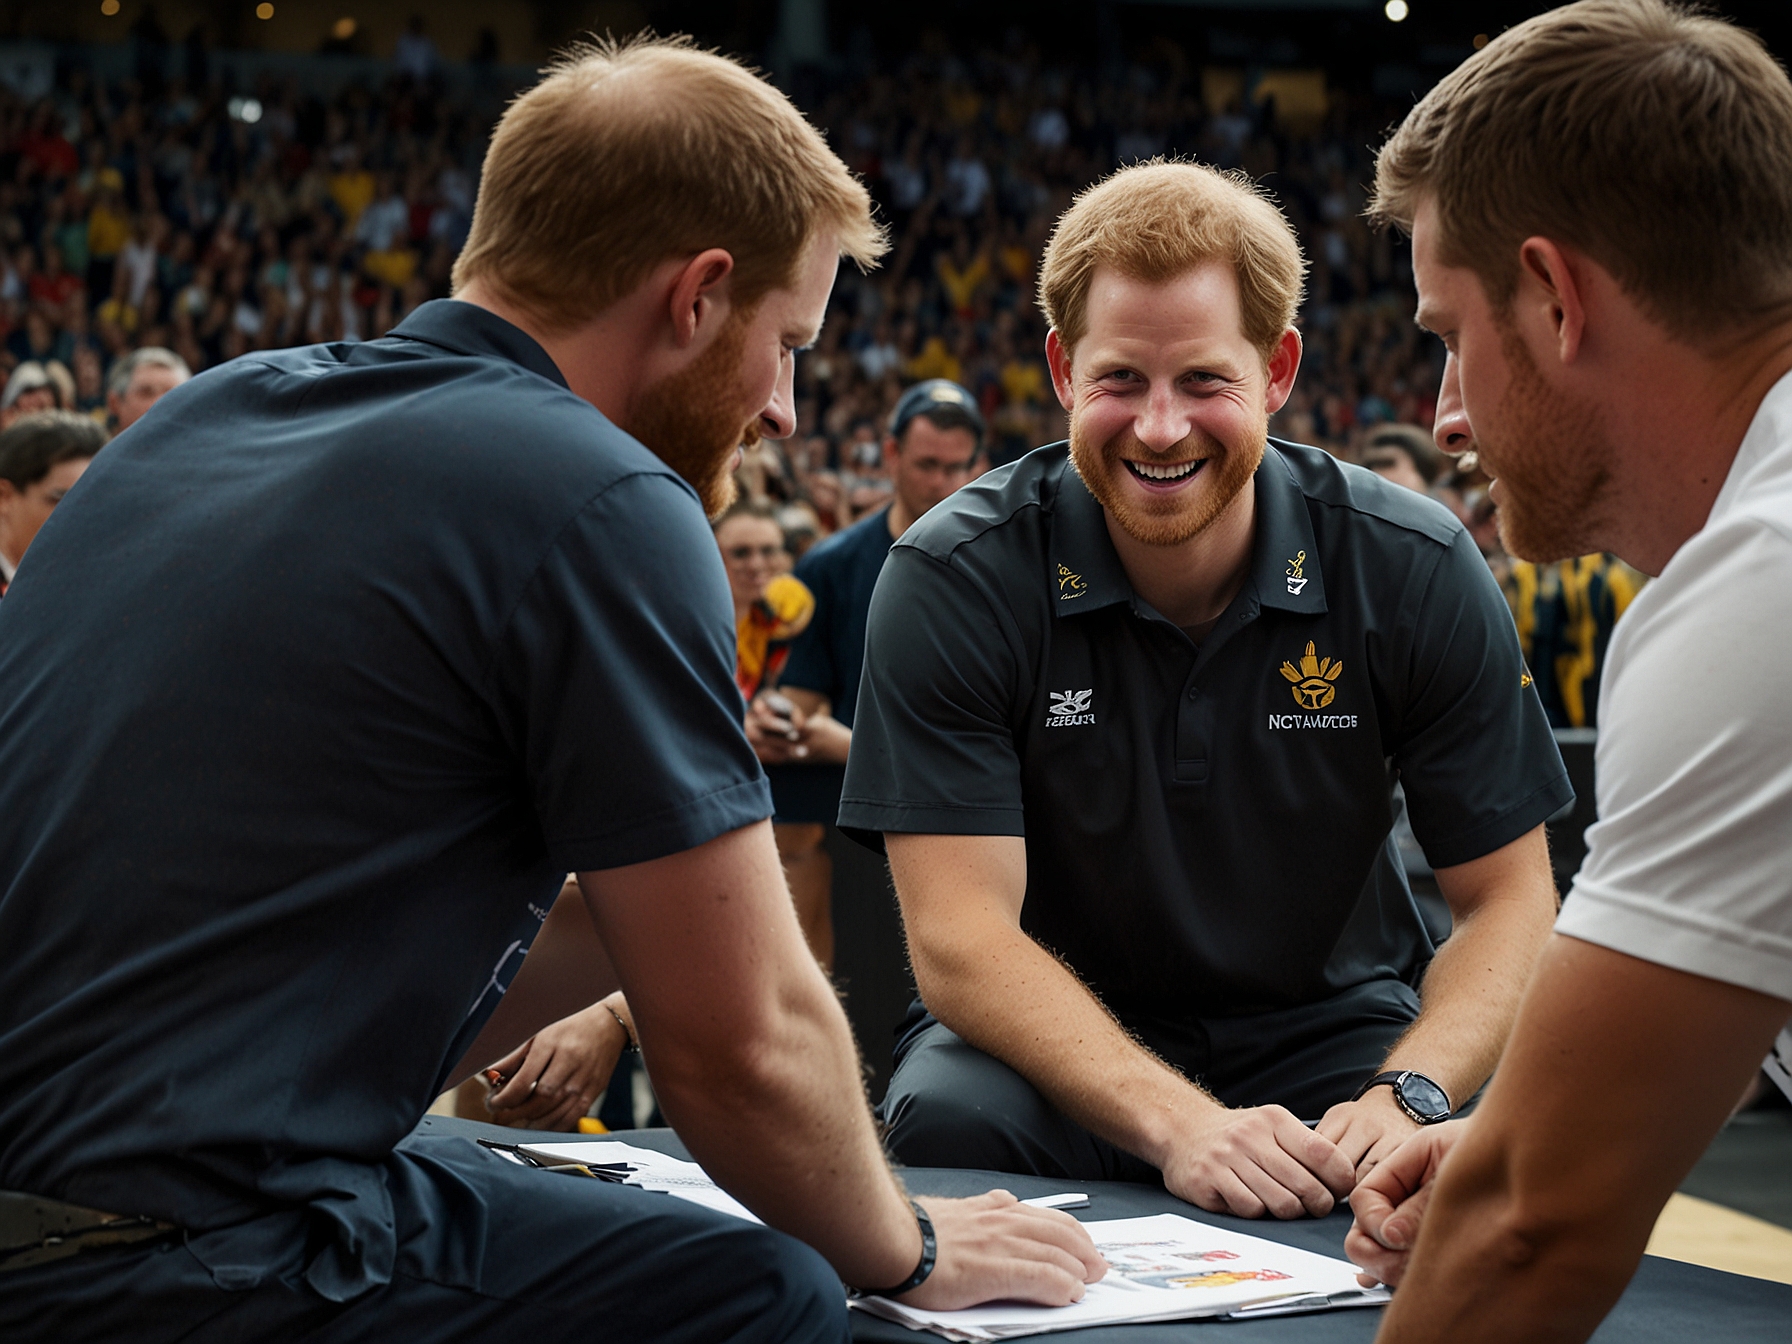 Prince Harry engaging with participants at the Invictus Games, highlighting his work with injured veterans. This image underscores the services that resonated with the ESPYs selection committee.